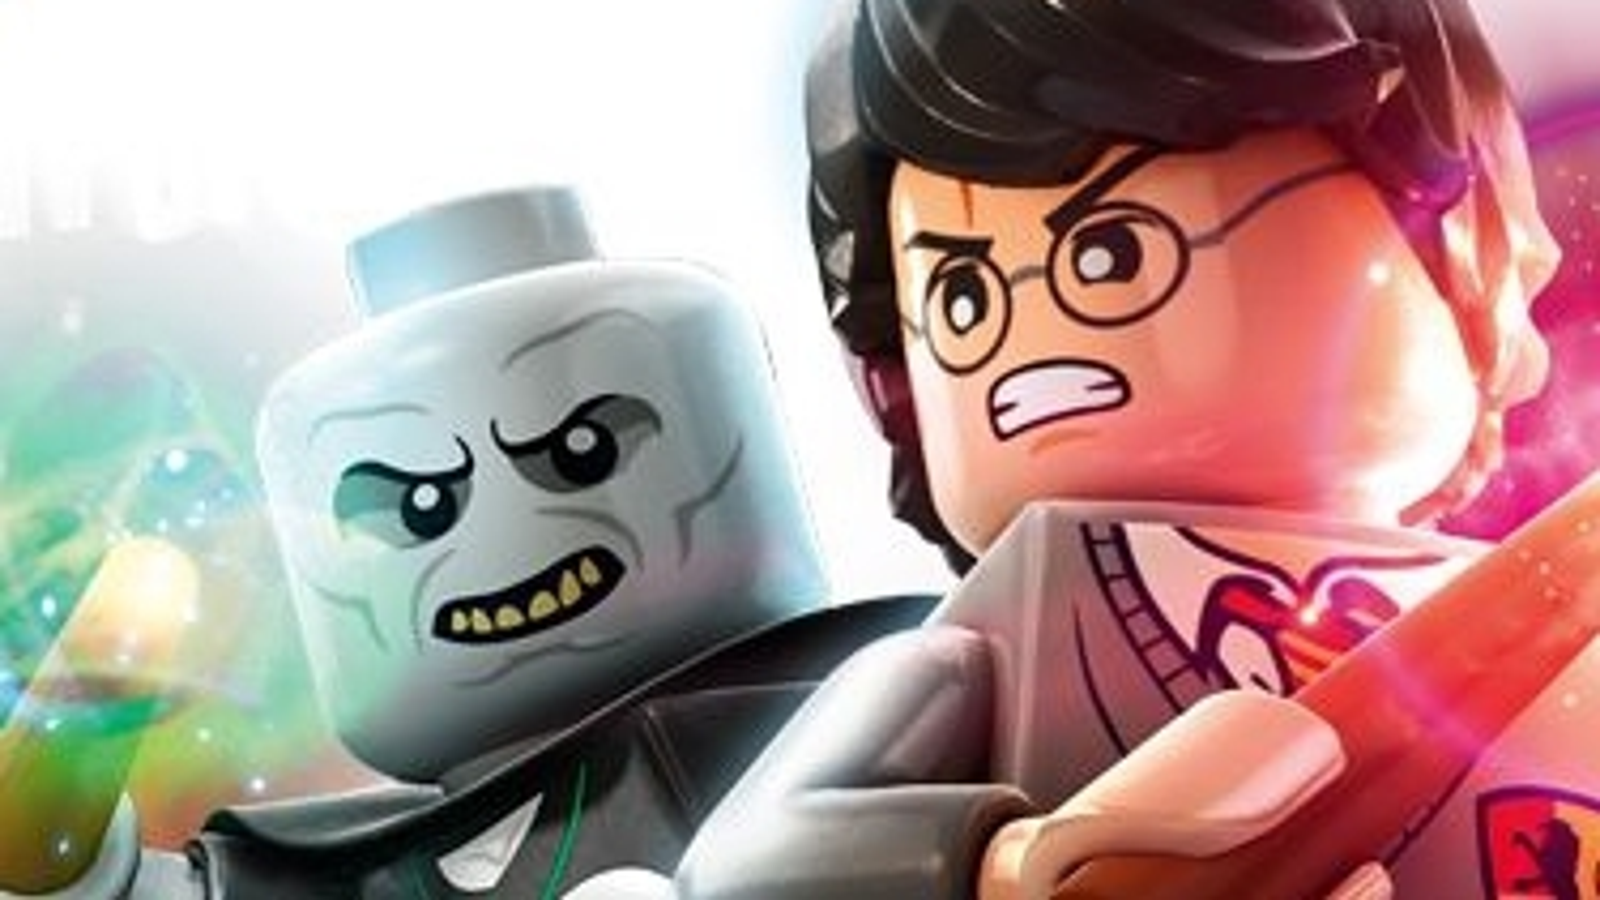 LEGO Harry Potter Collection' Comes to Xbox One and Switch This Fall